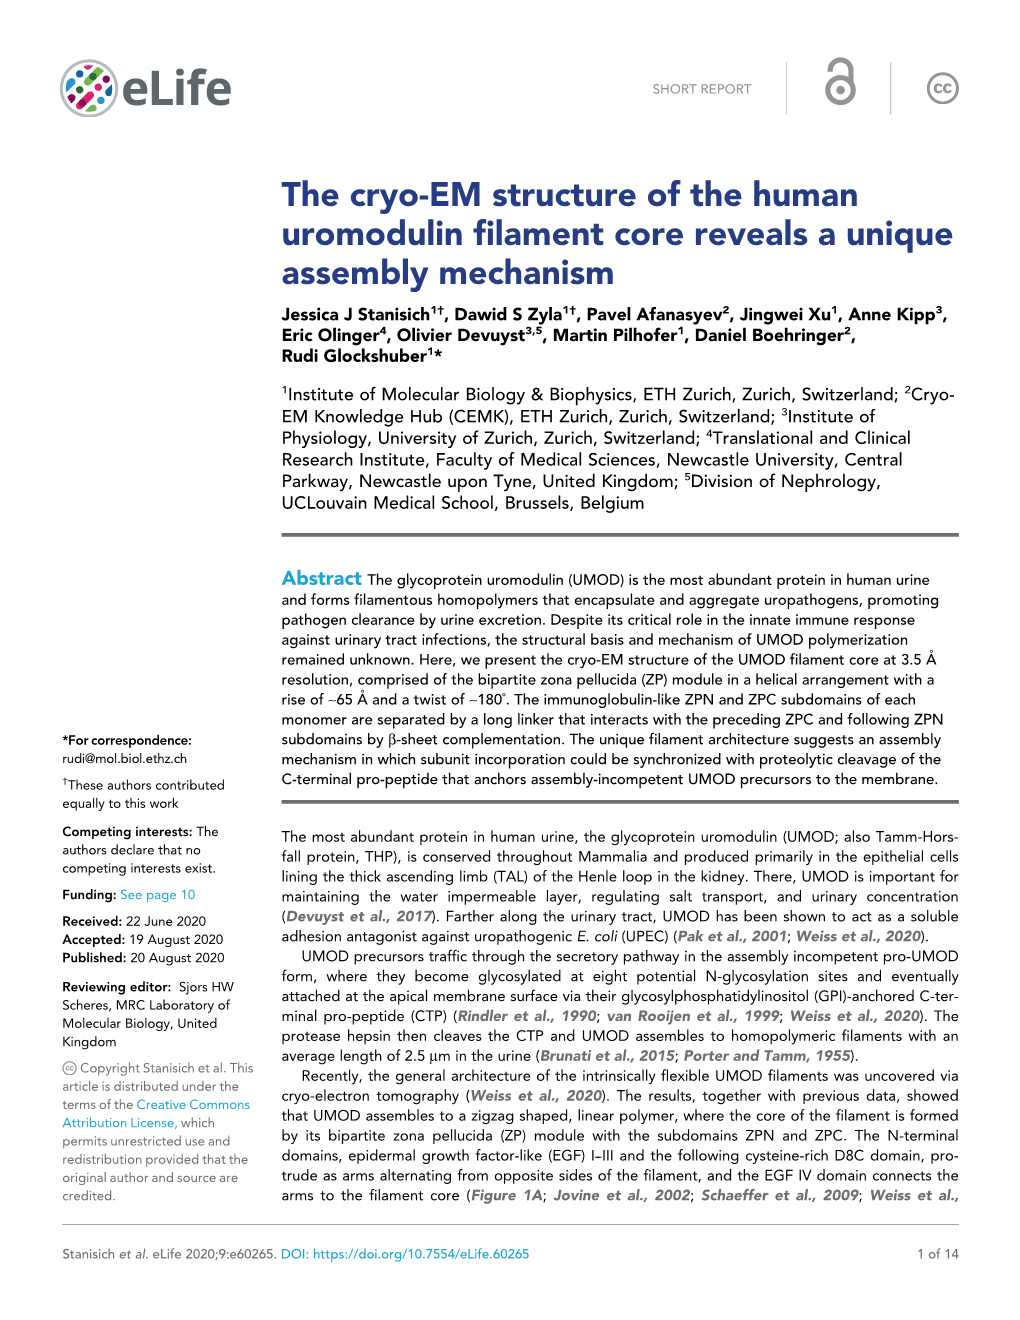 The Cryo-EM Structure of the Human Uromodulin Filament Core Reveals A